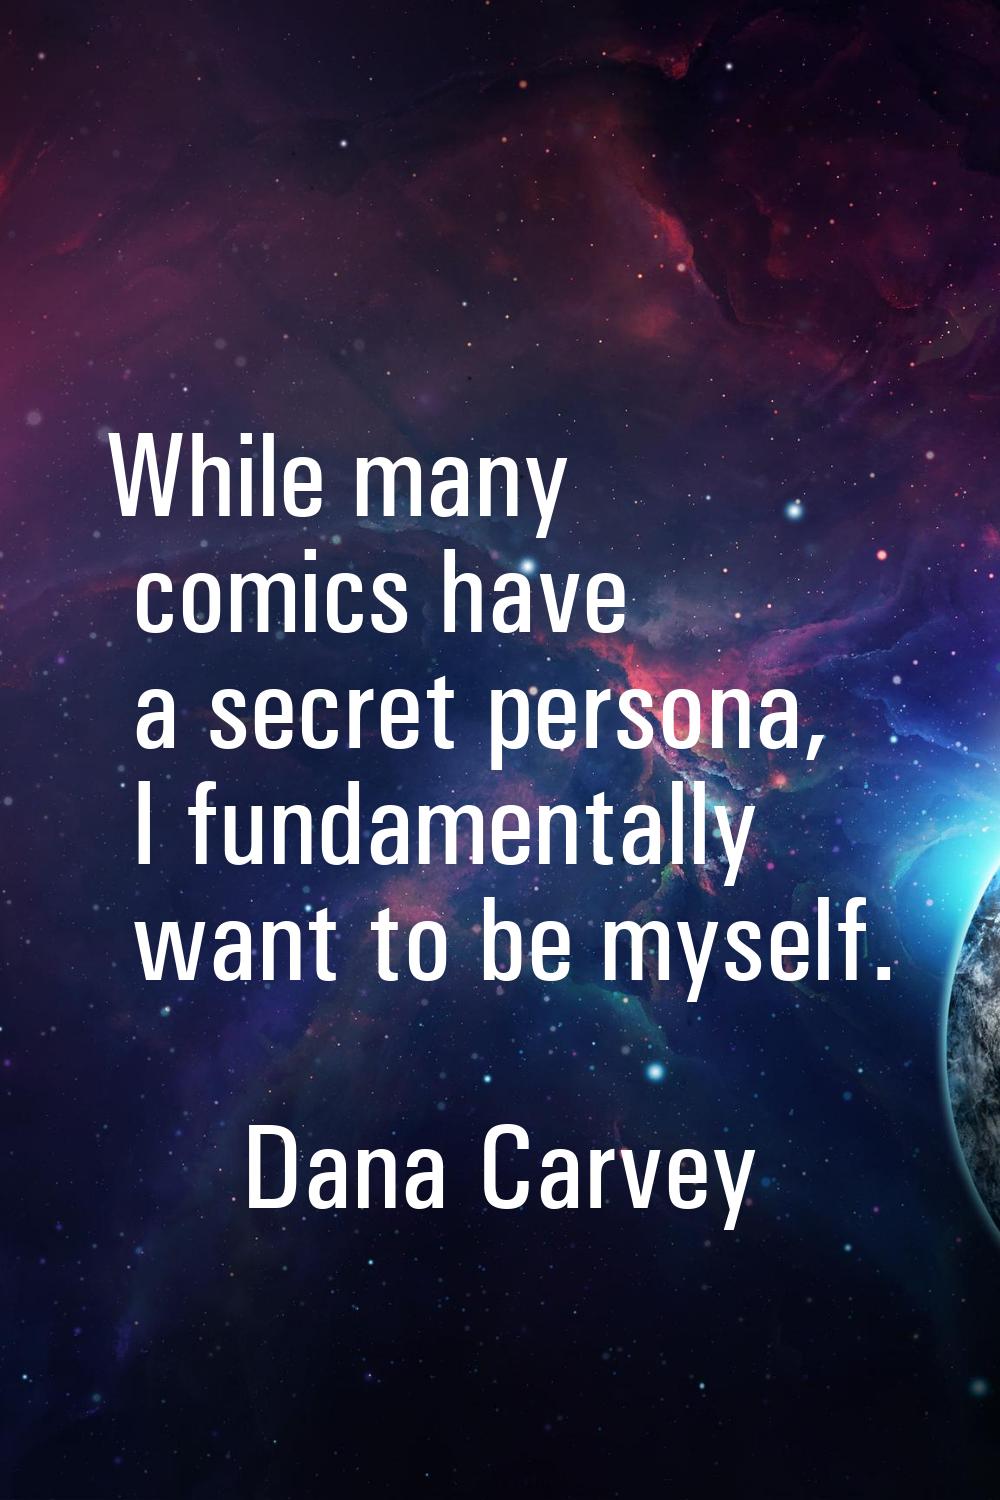 While many comics have a secret persona, I fundamentally want to be myself.